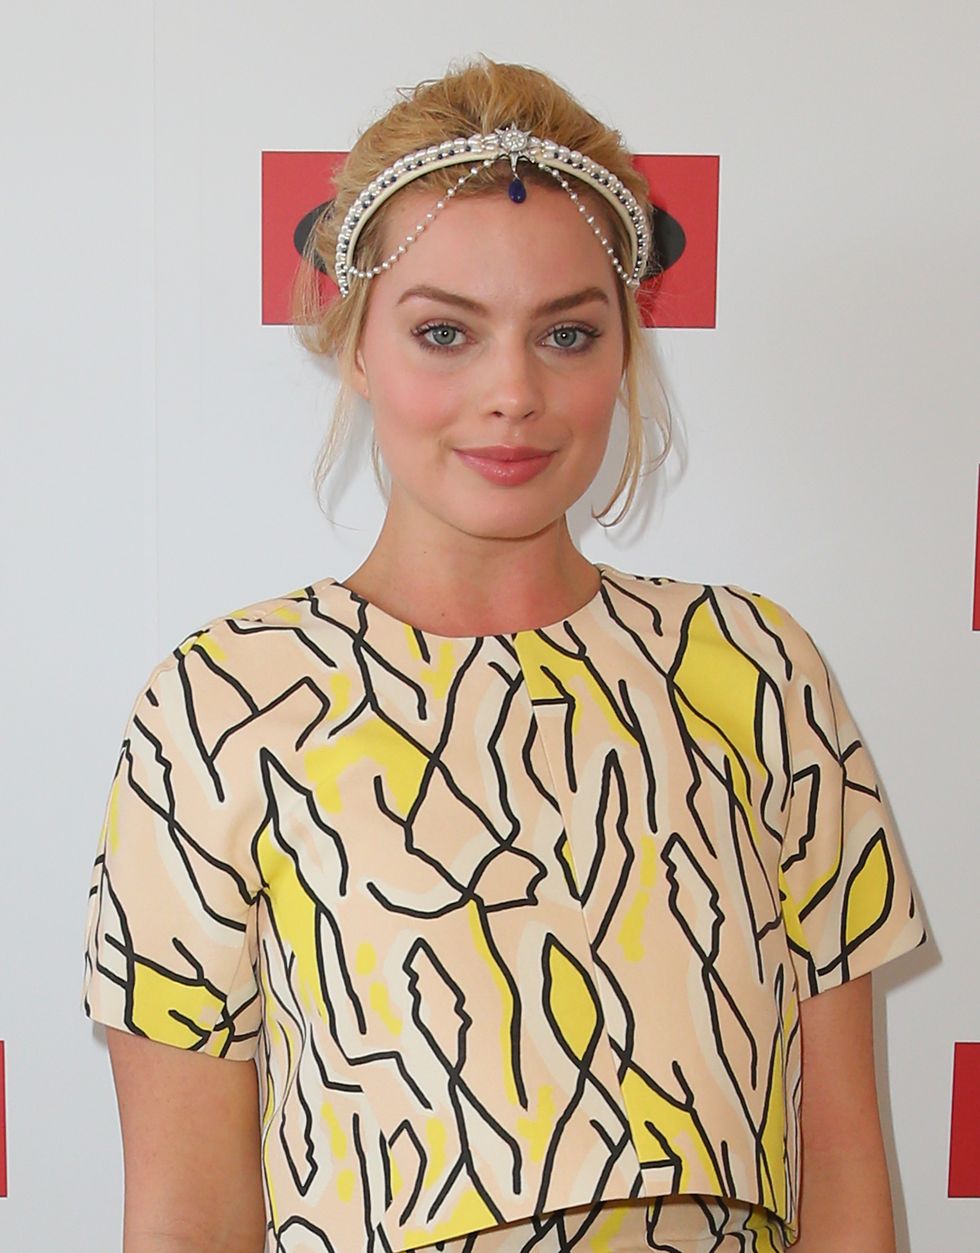 Margot Robbie works the hair accessory trend